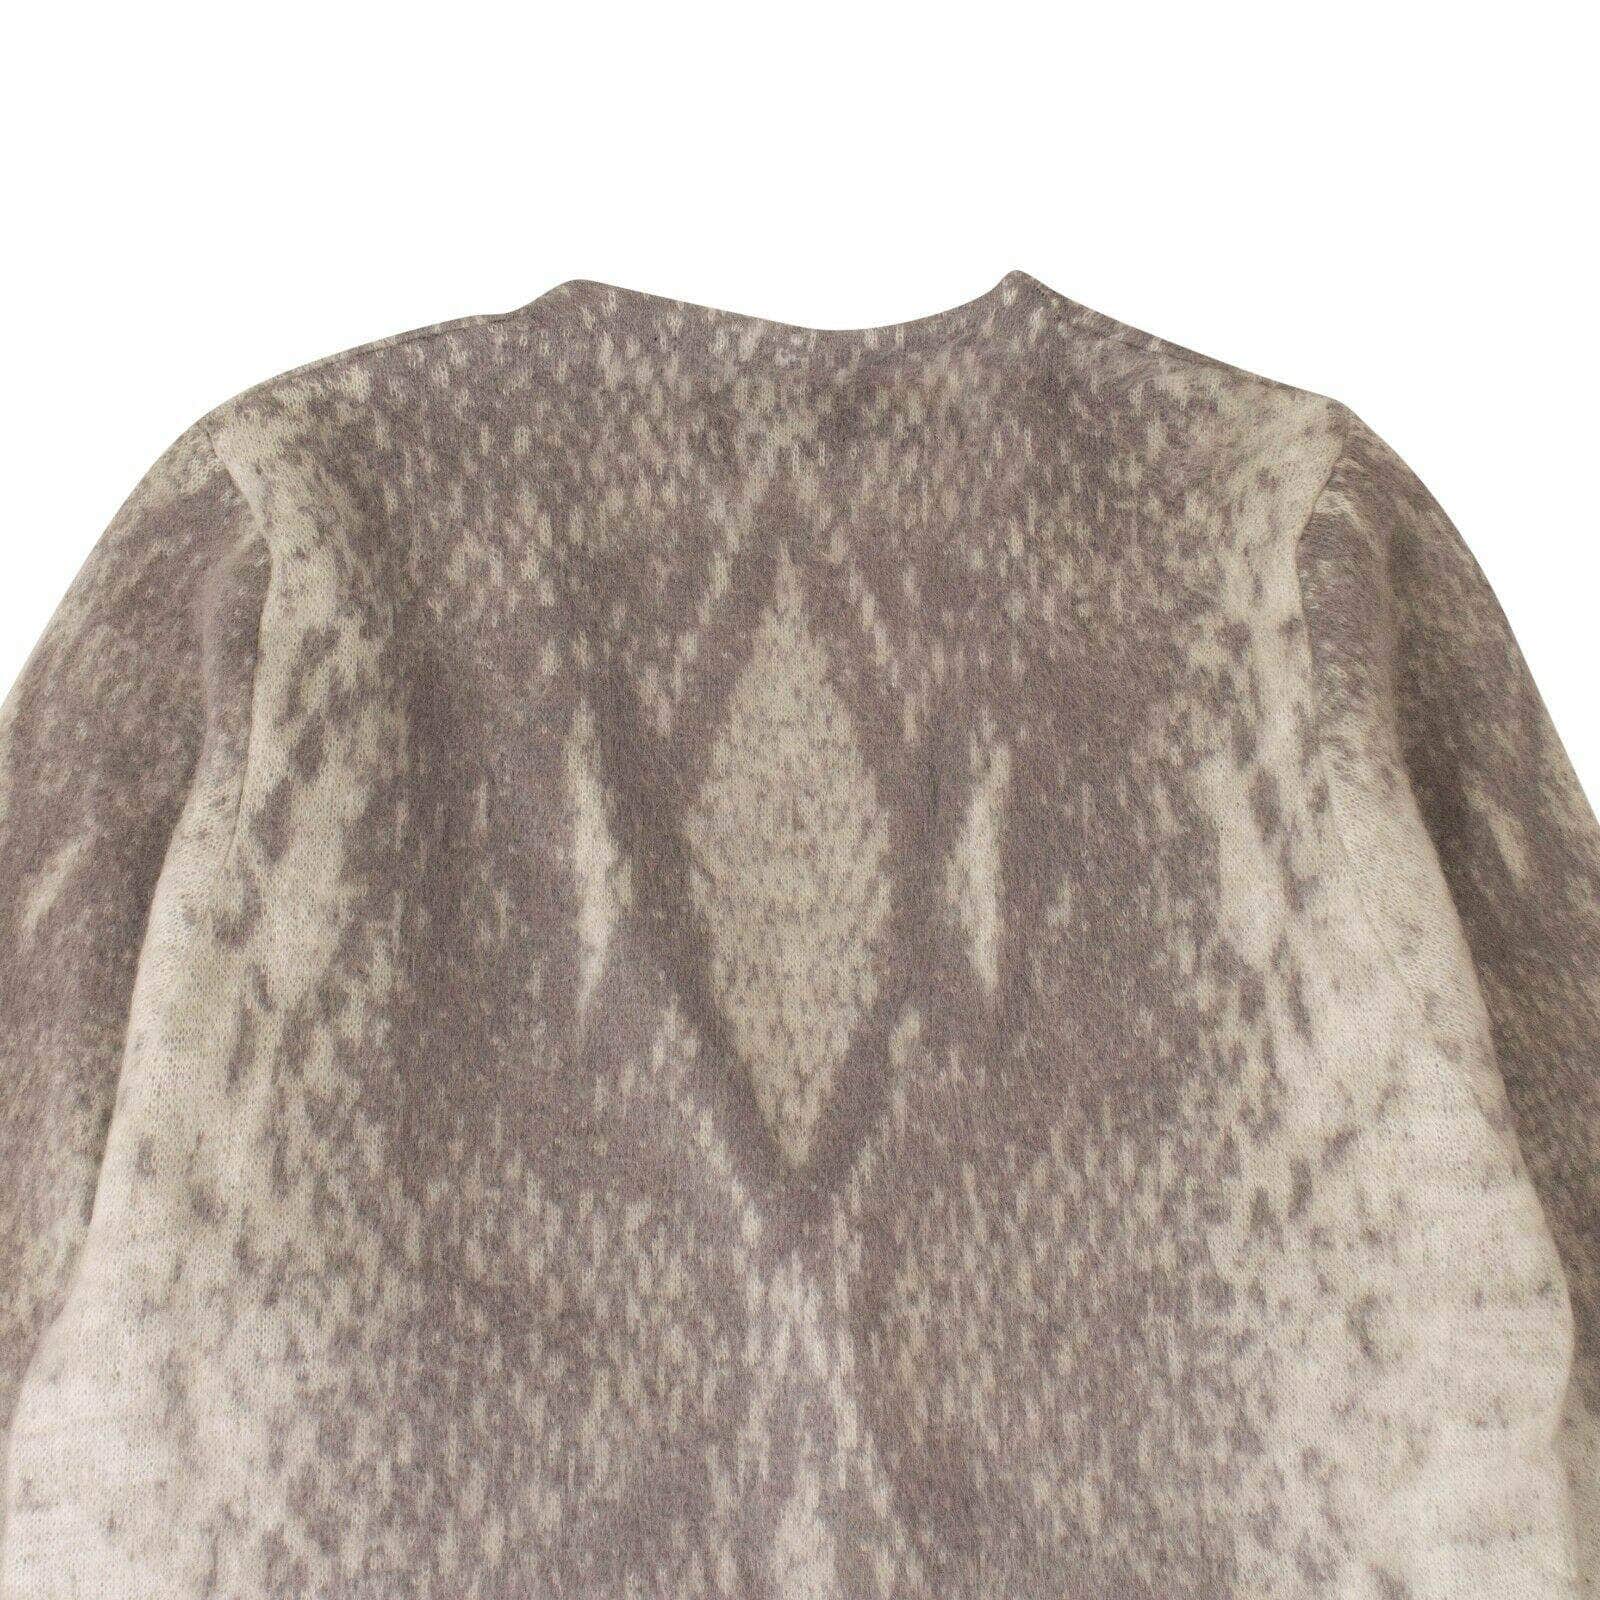 Amiri 250-500, amiri, AMR, AWC1, channelenable-all, chicmi, couponcollection, gender-womens, main-clothing, size-s, size-xs, SPO, womens-cardigans Women's Gray Snakeskin Print Oversized Cardigan Sweater